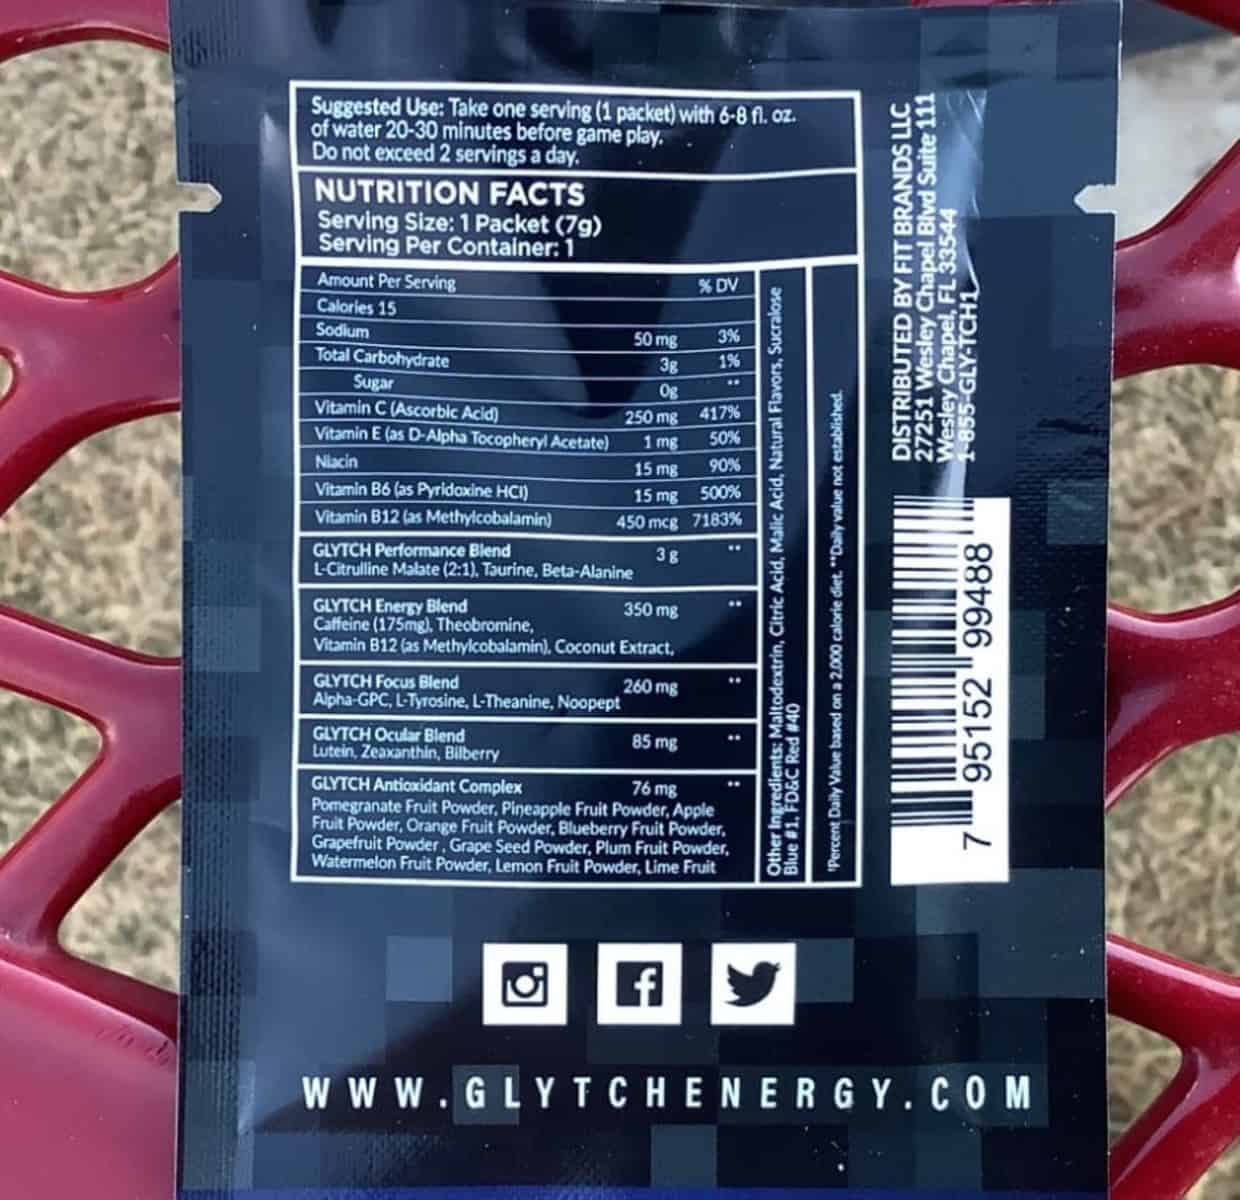 Supplement facts of Glytch Energy